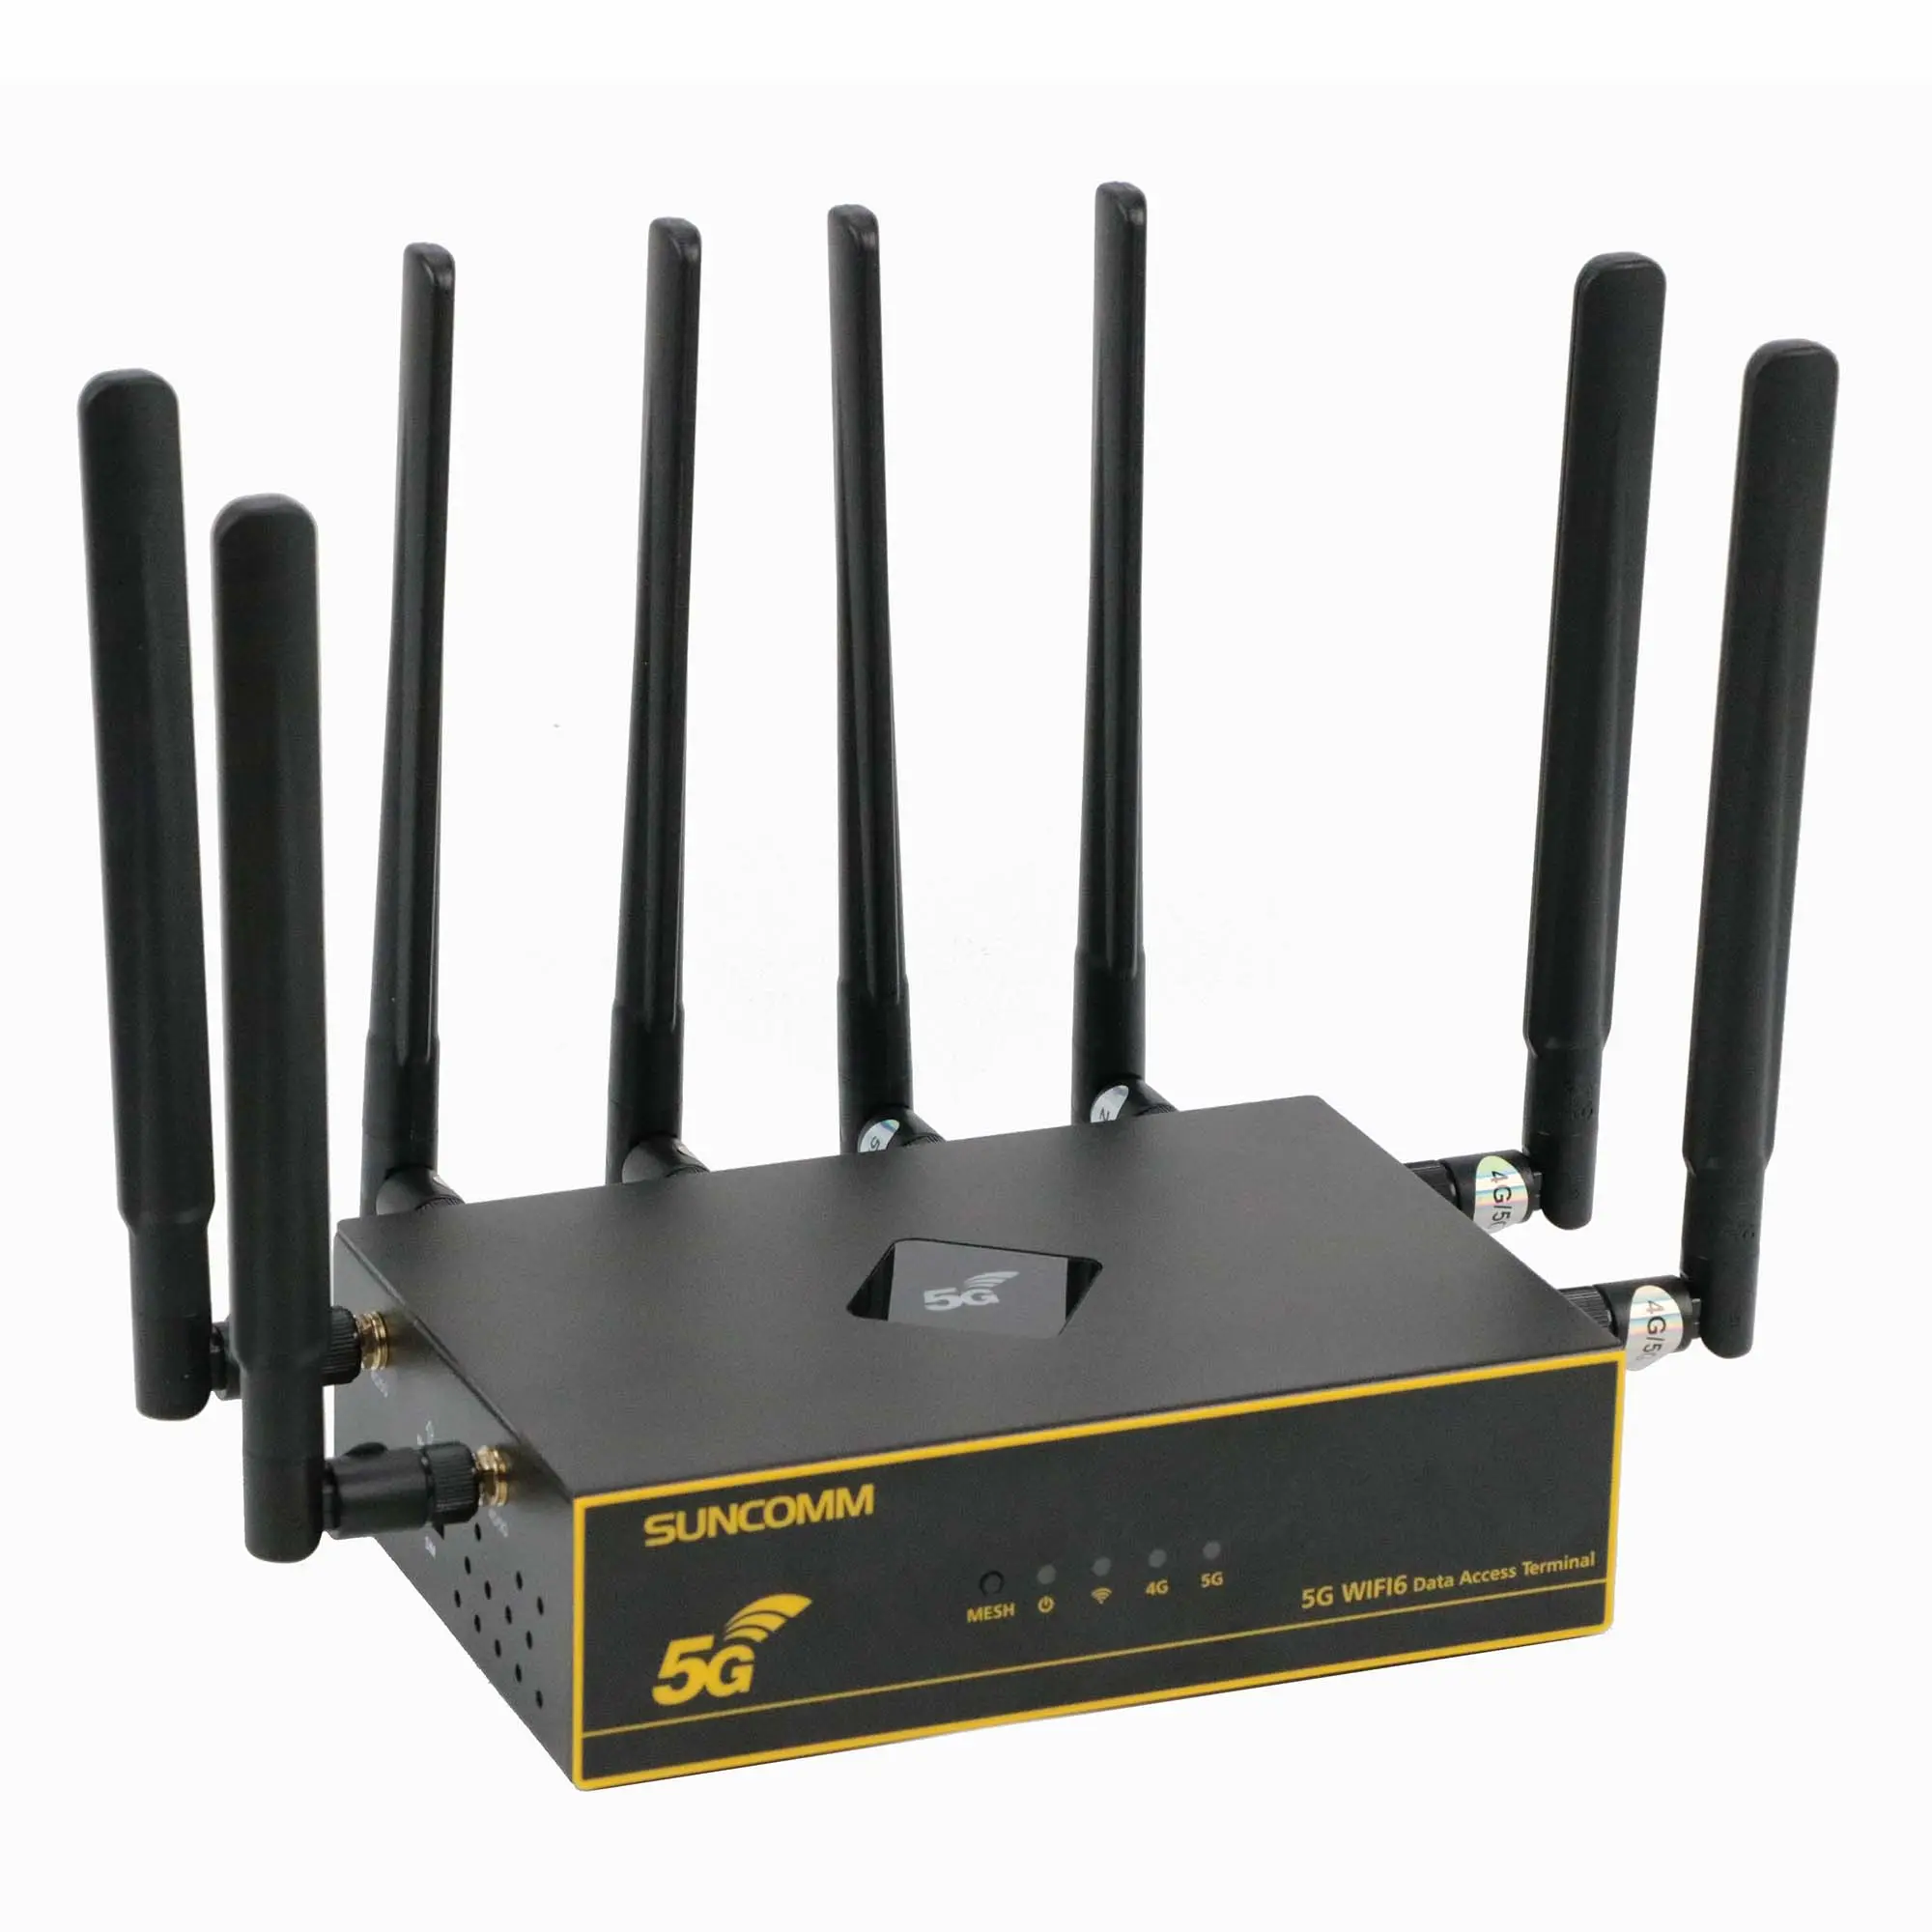 Philippines Hot selling 5G router with sim card slot X62 WiFi 6 2.4G/5.8Ghz WiFi MESH QoS VPN 5G router